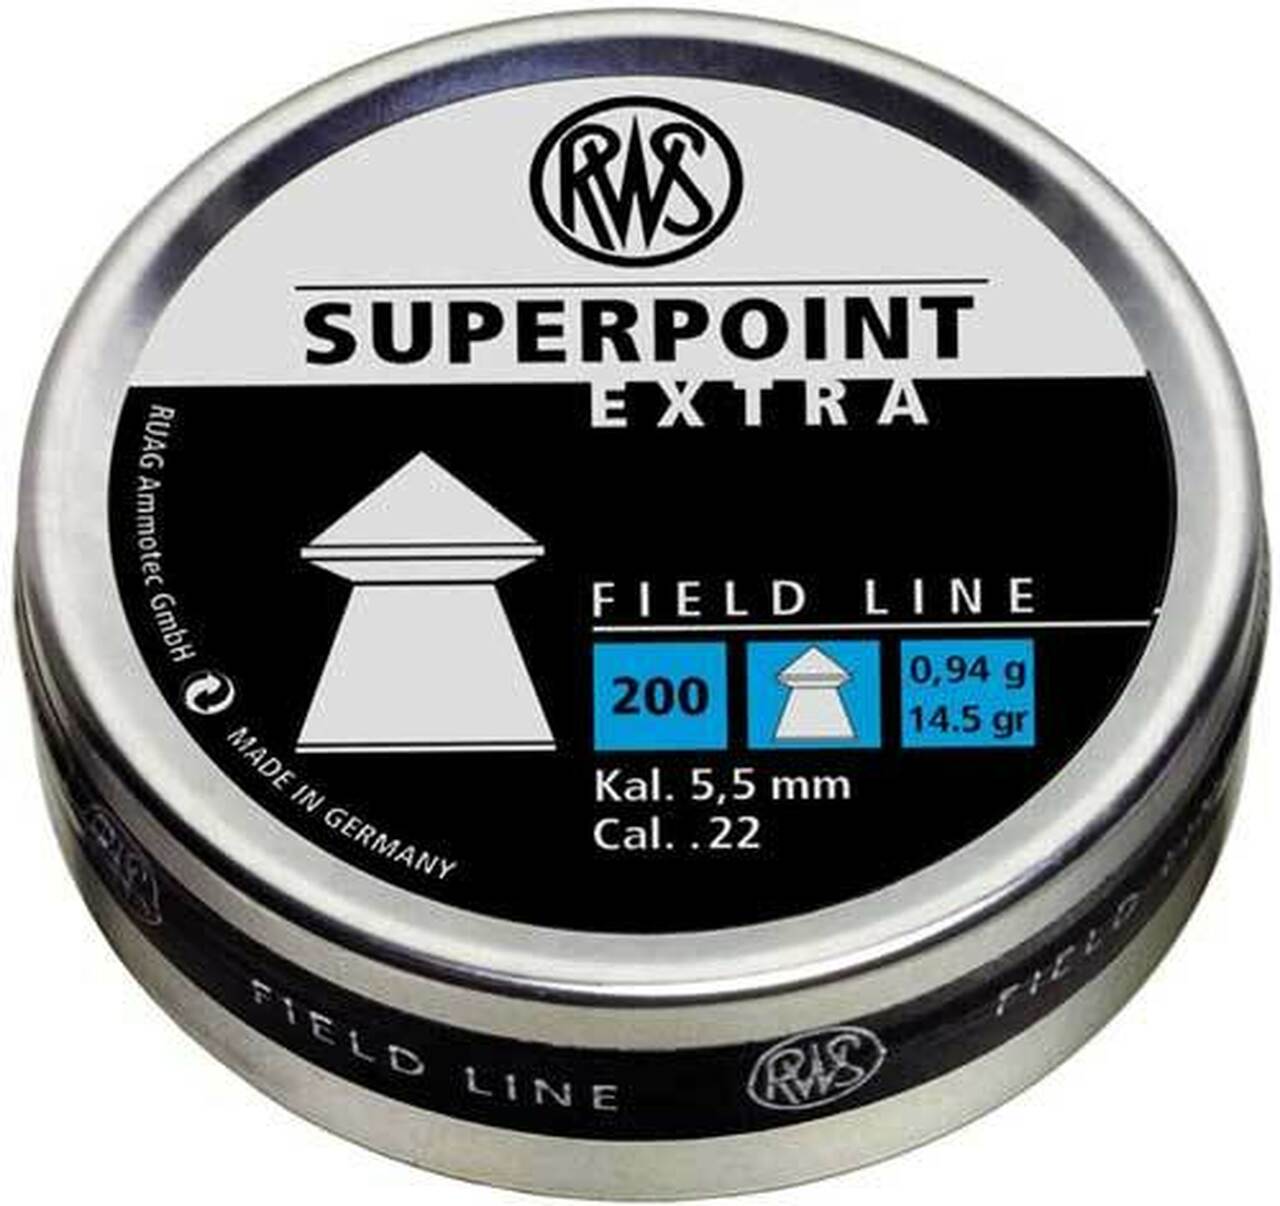 Image of Umarex RWS Superpoint Extra Field Line 177 Pellet